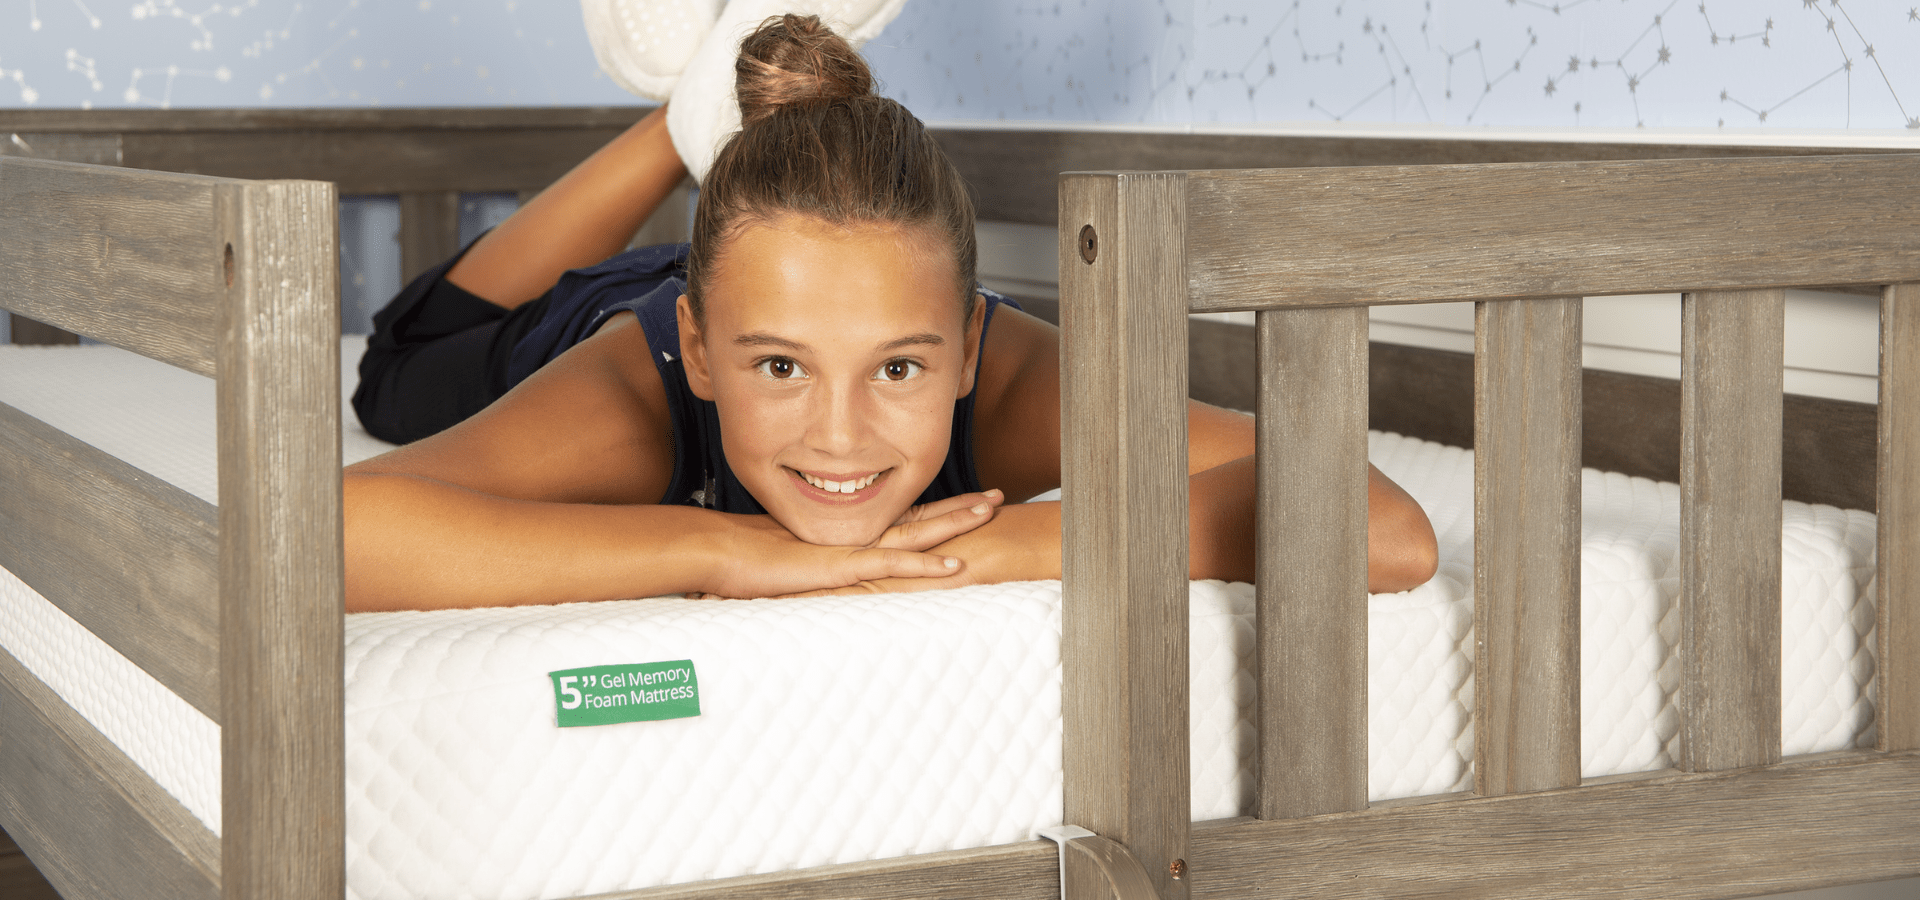 6 Things to Look For in a Mattress for Kids